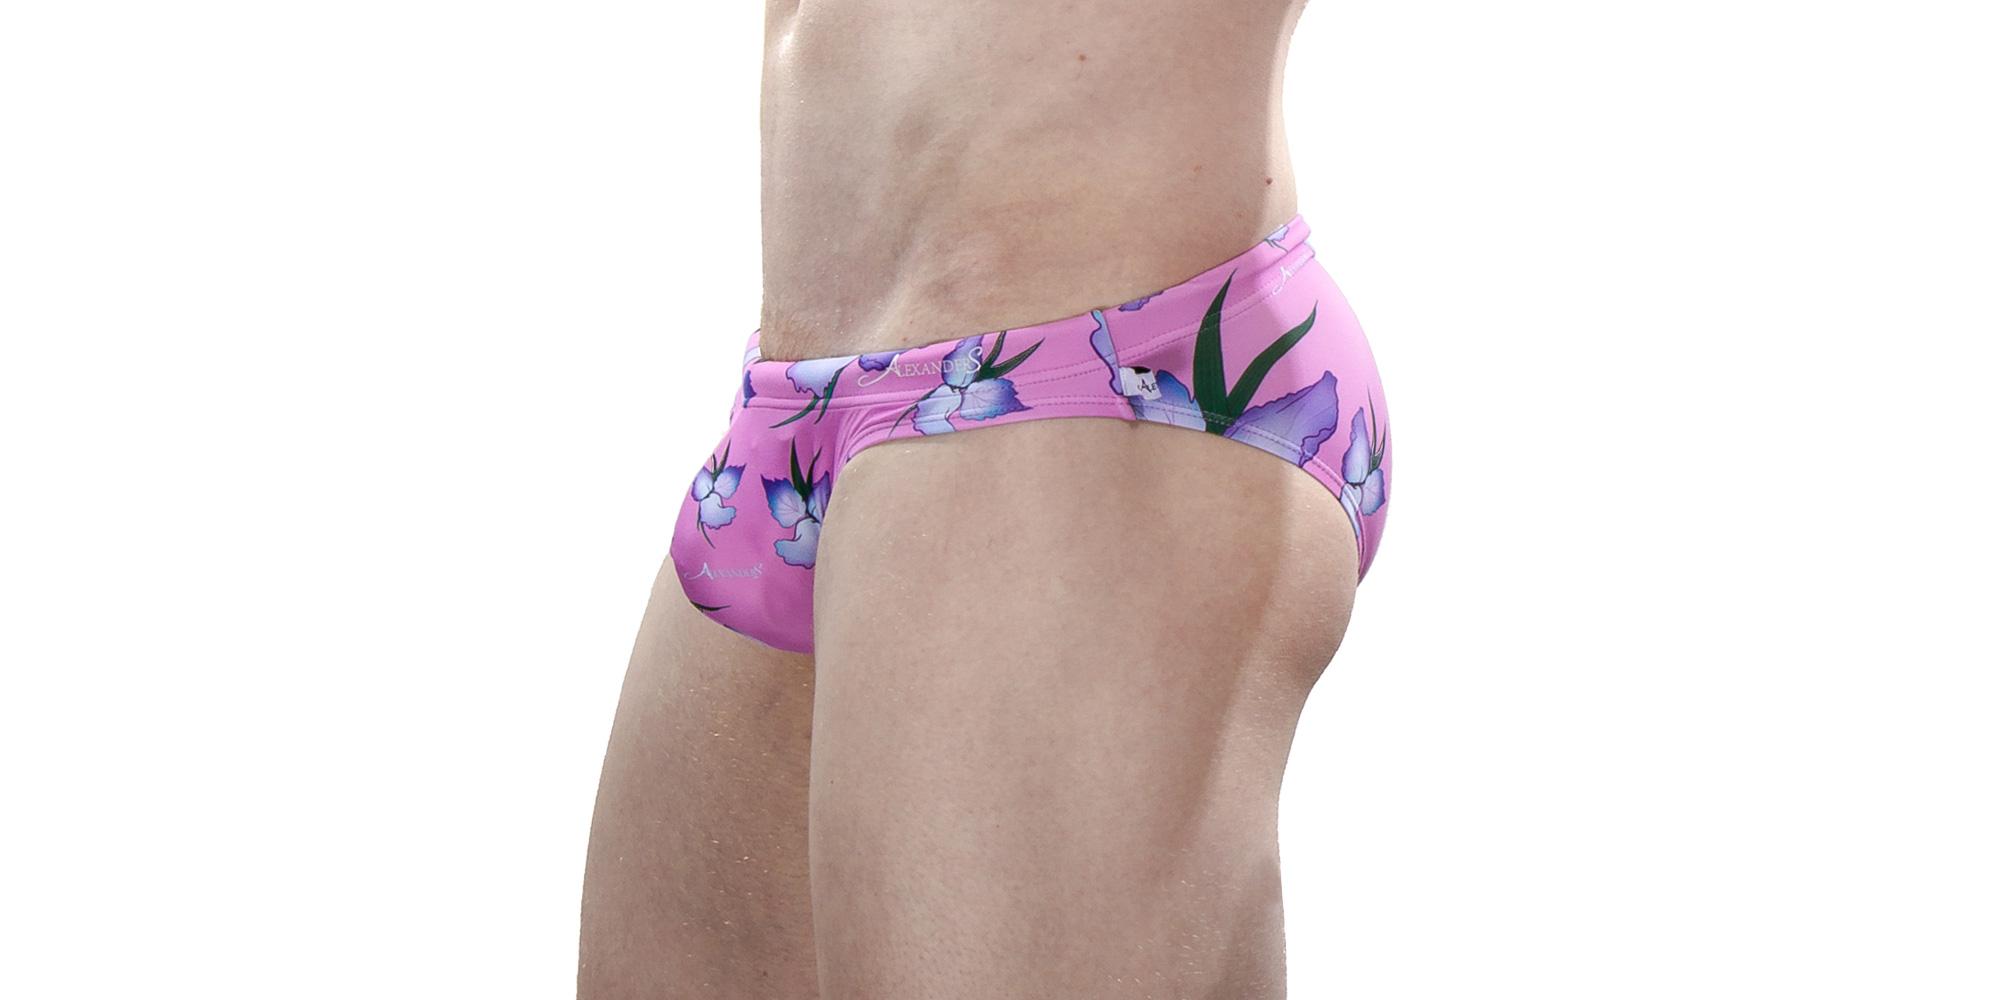 Shop sexy men's swimwear and underwear! AlexanderS Collection including new styles for mens swimwear, mens swim trunks, compression leggings, mens thongs, sexy